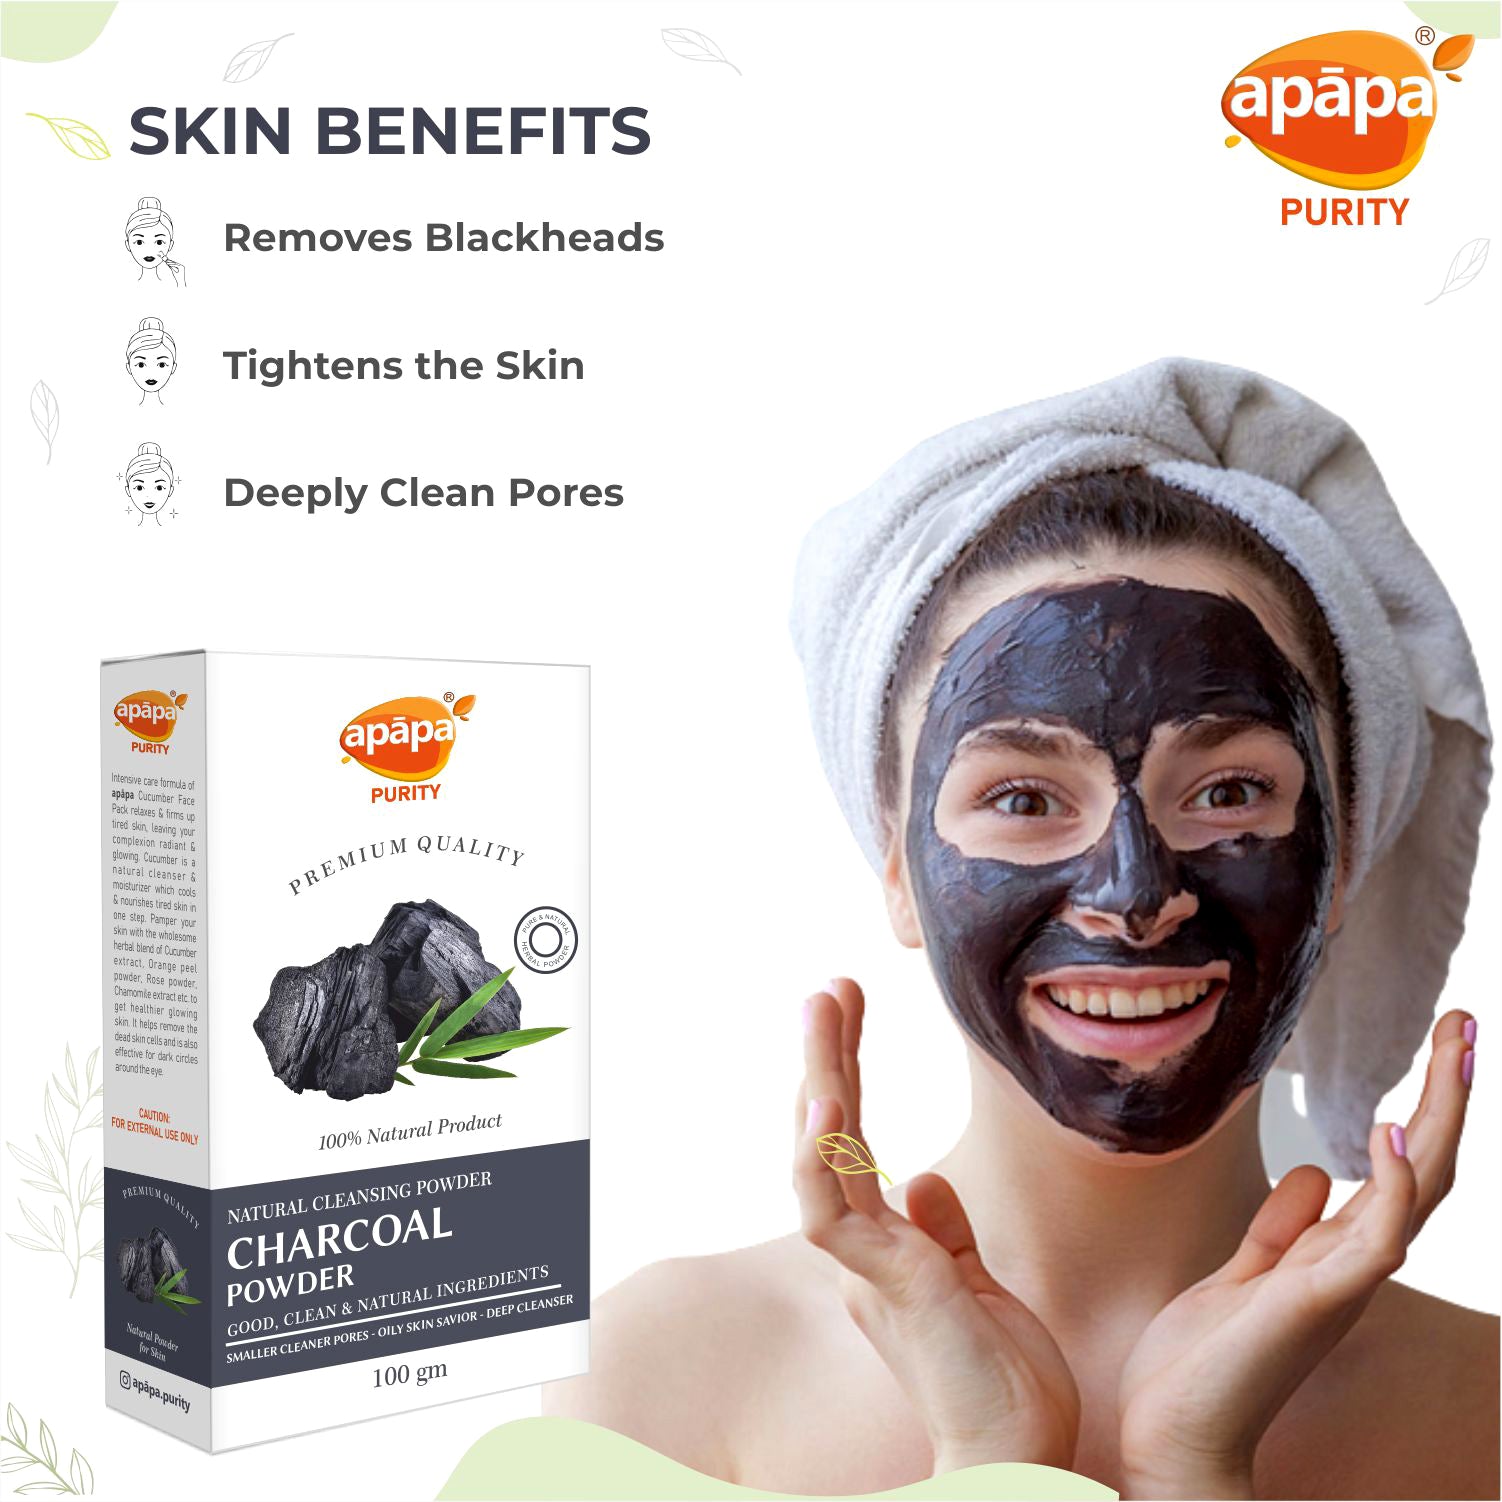 APĀPA Natural Cleansing & Exfoliating Charcoal Powder for Skin